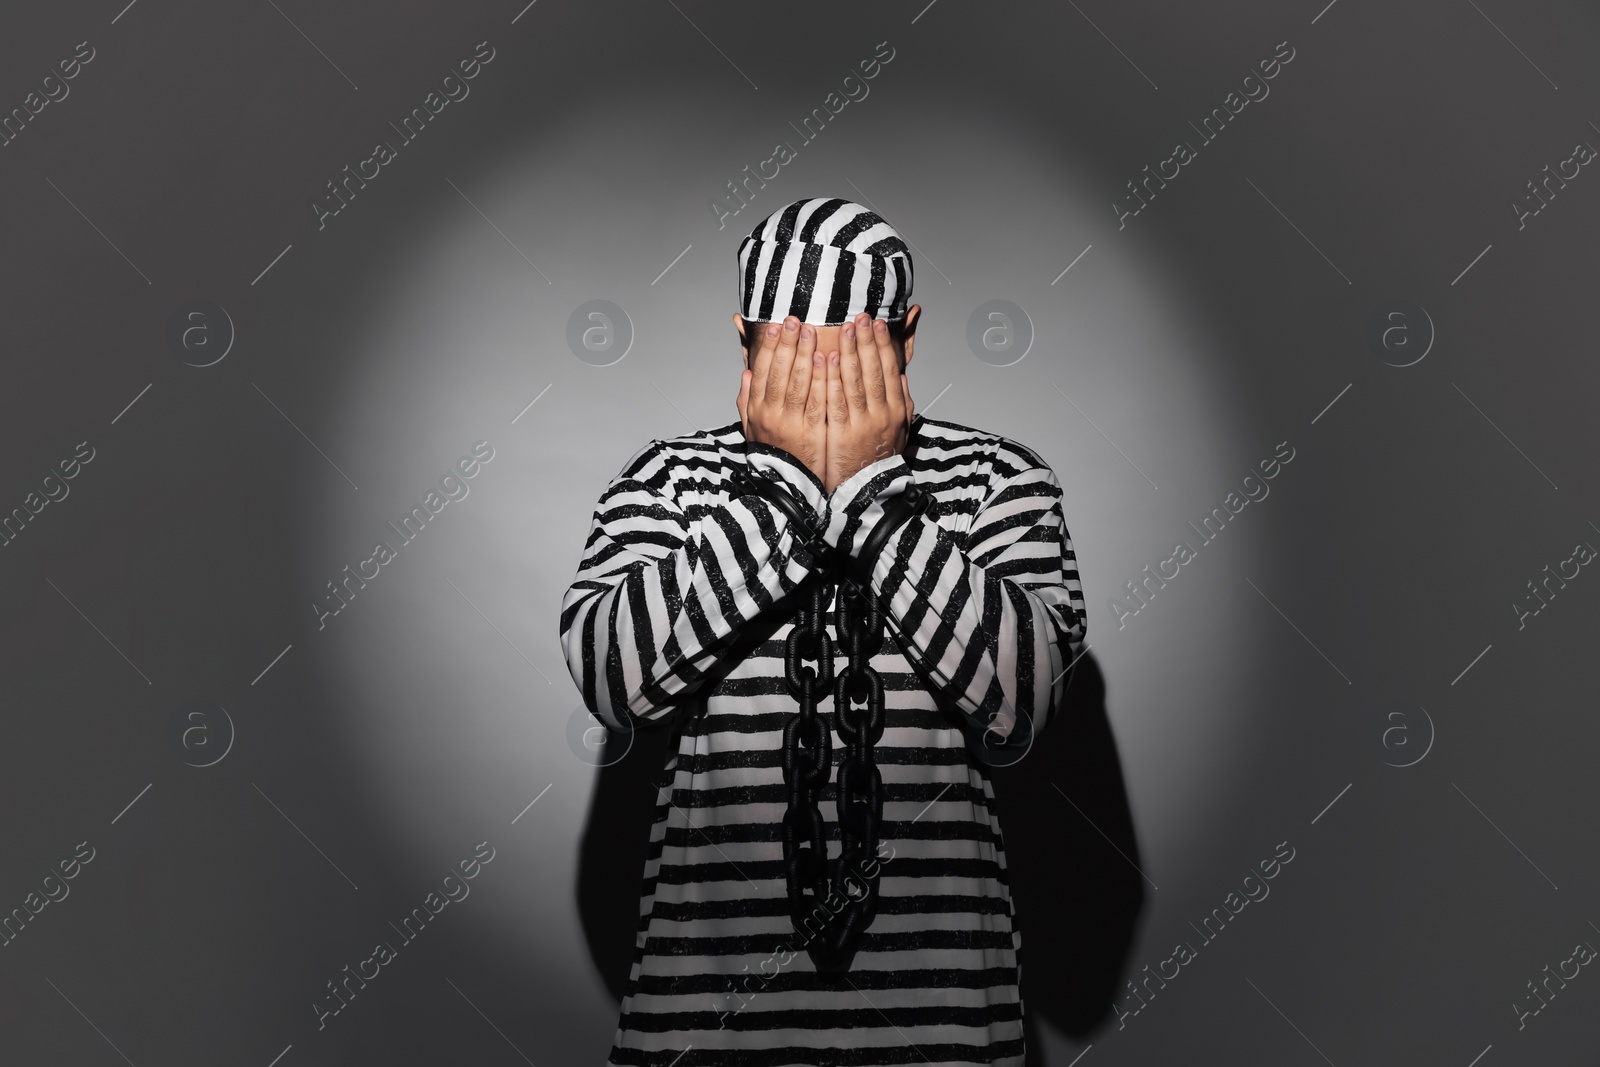 Photo of Prisoner in special uniform with chained hands on grey background